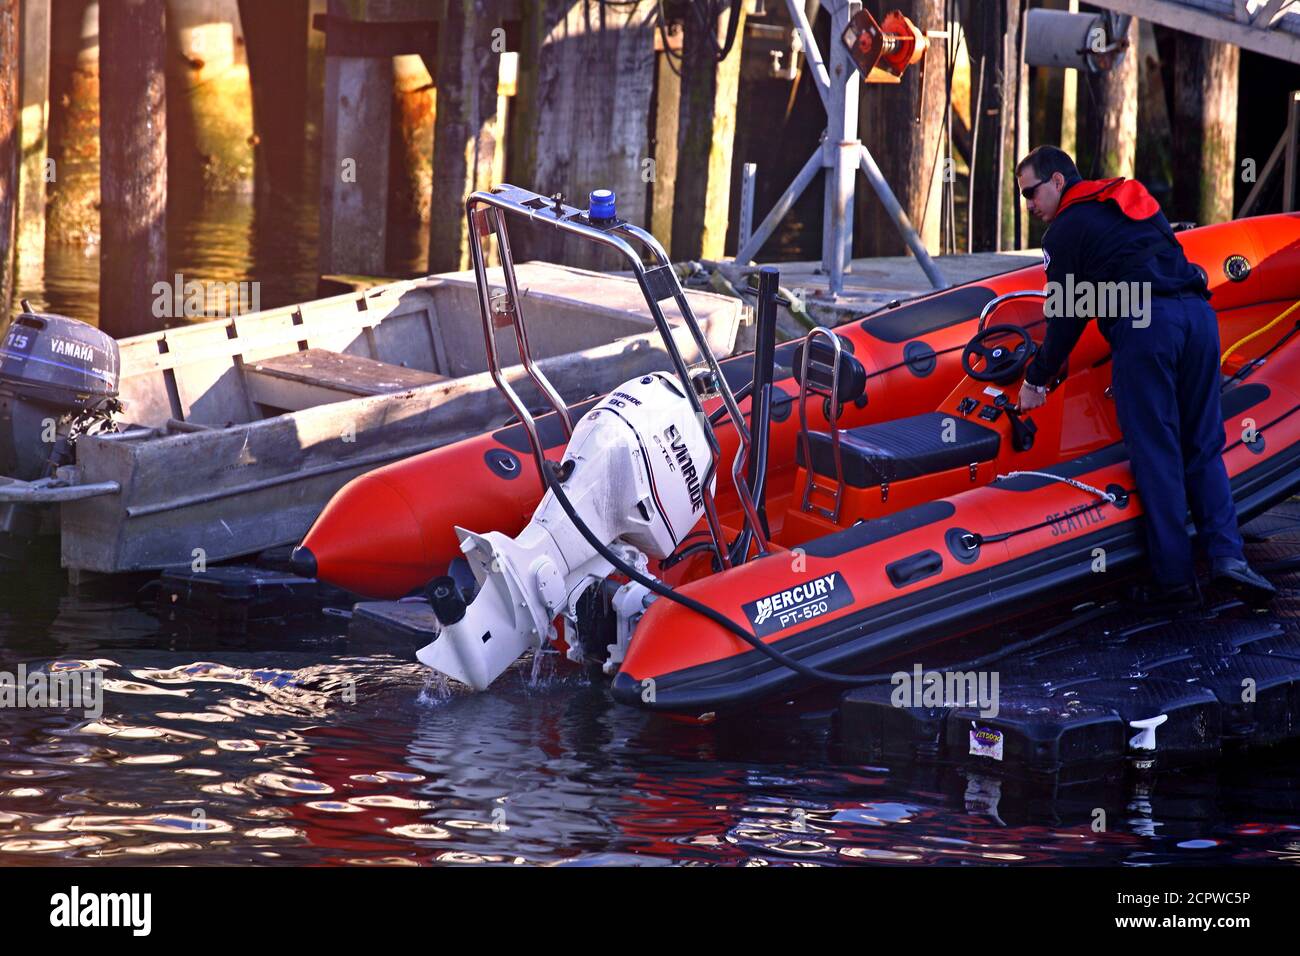 The Seattle Fire Department has water craft for fighting fires. Pictured is a small watercraft being checked to ensure it is ready for use if needed. Stock Photo